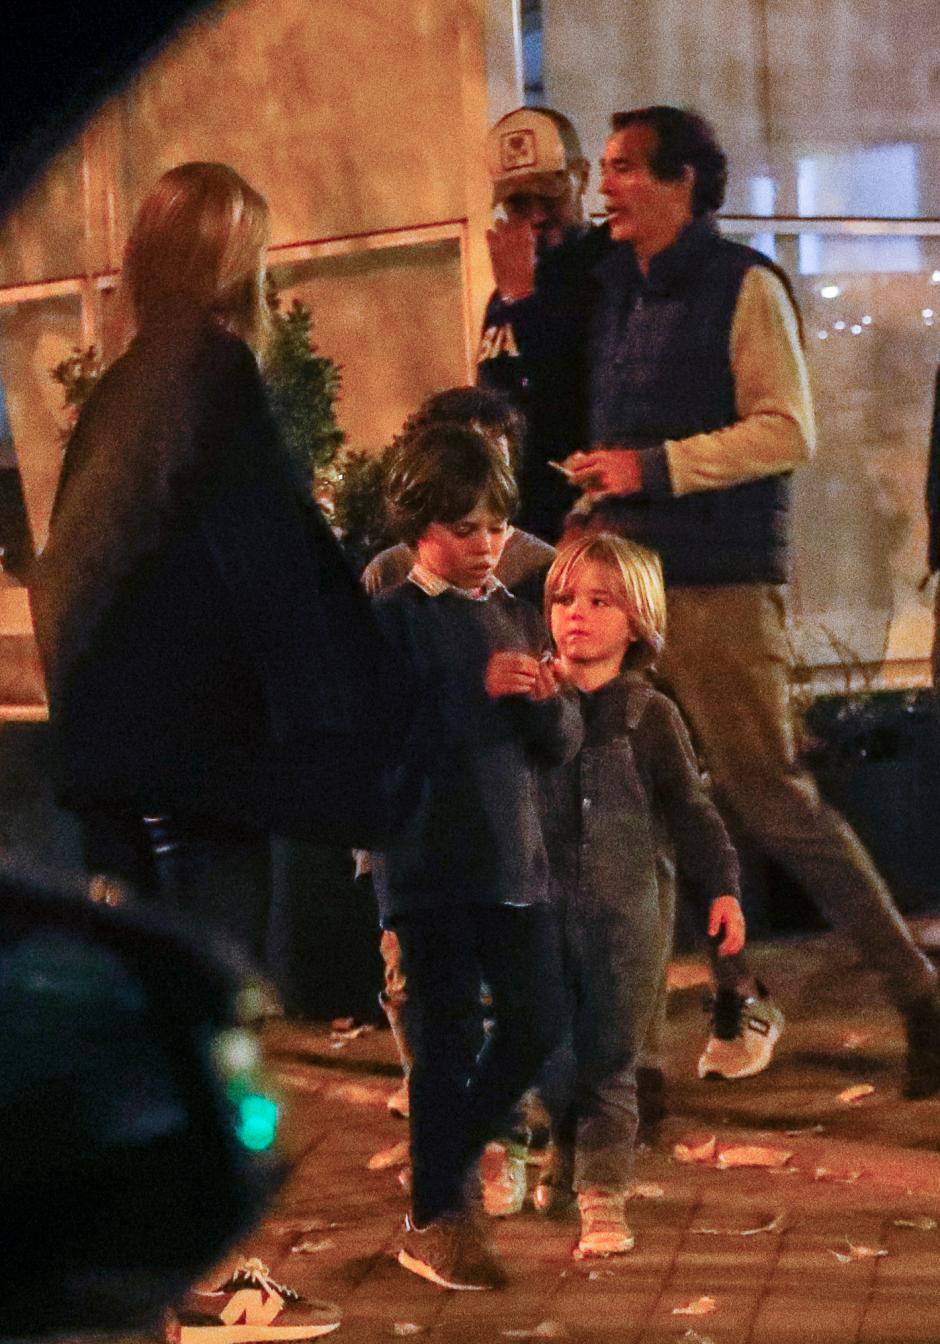 Amelia Bono and her sons and Fernando Ligués in madrid, November 21 2021.